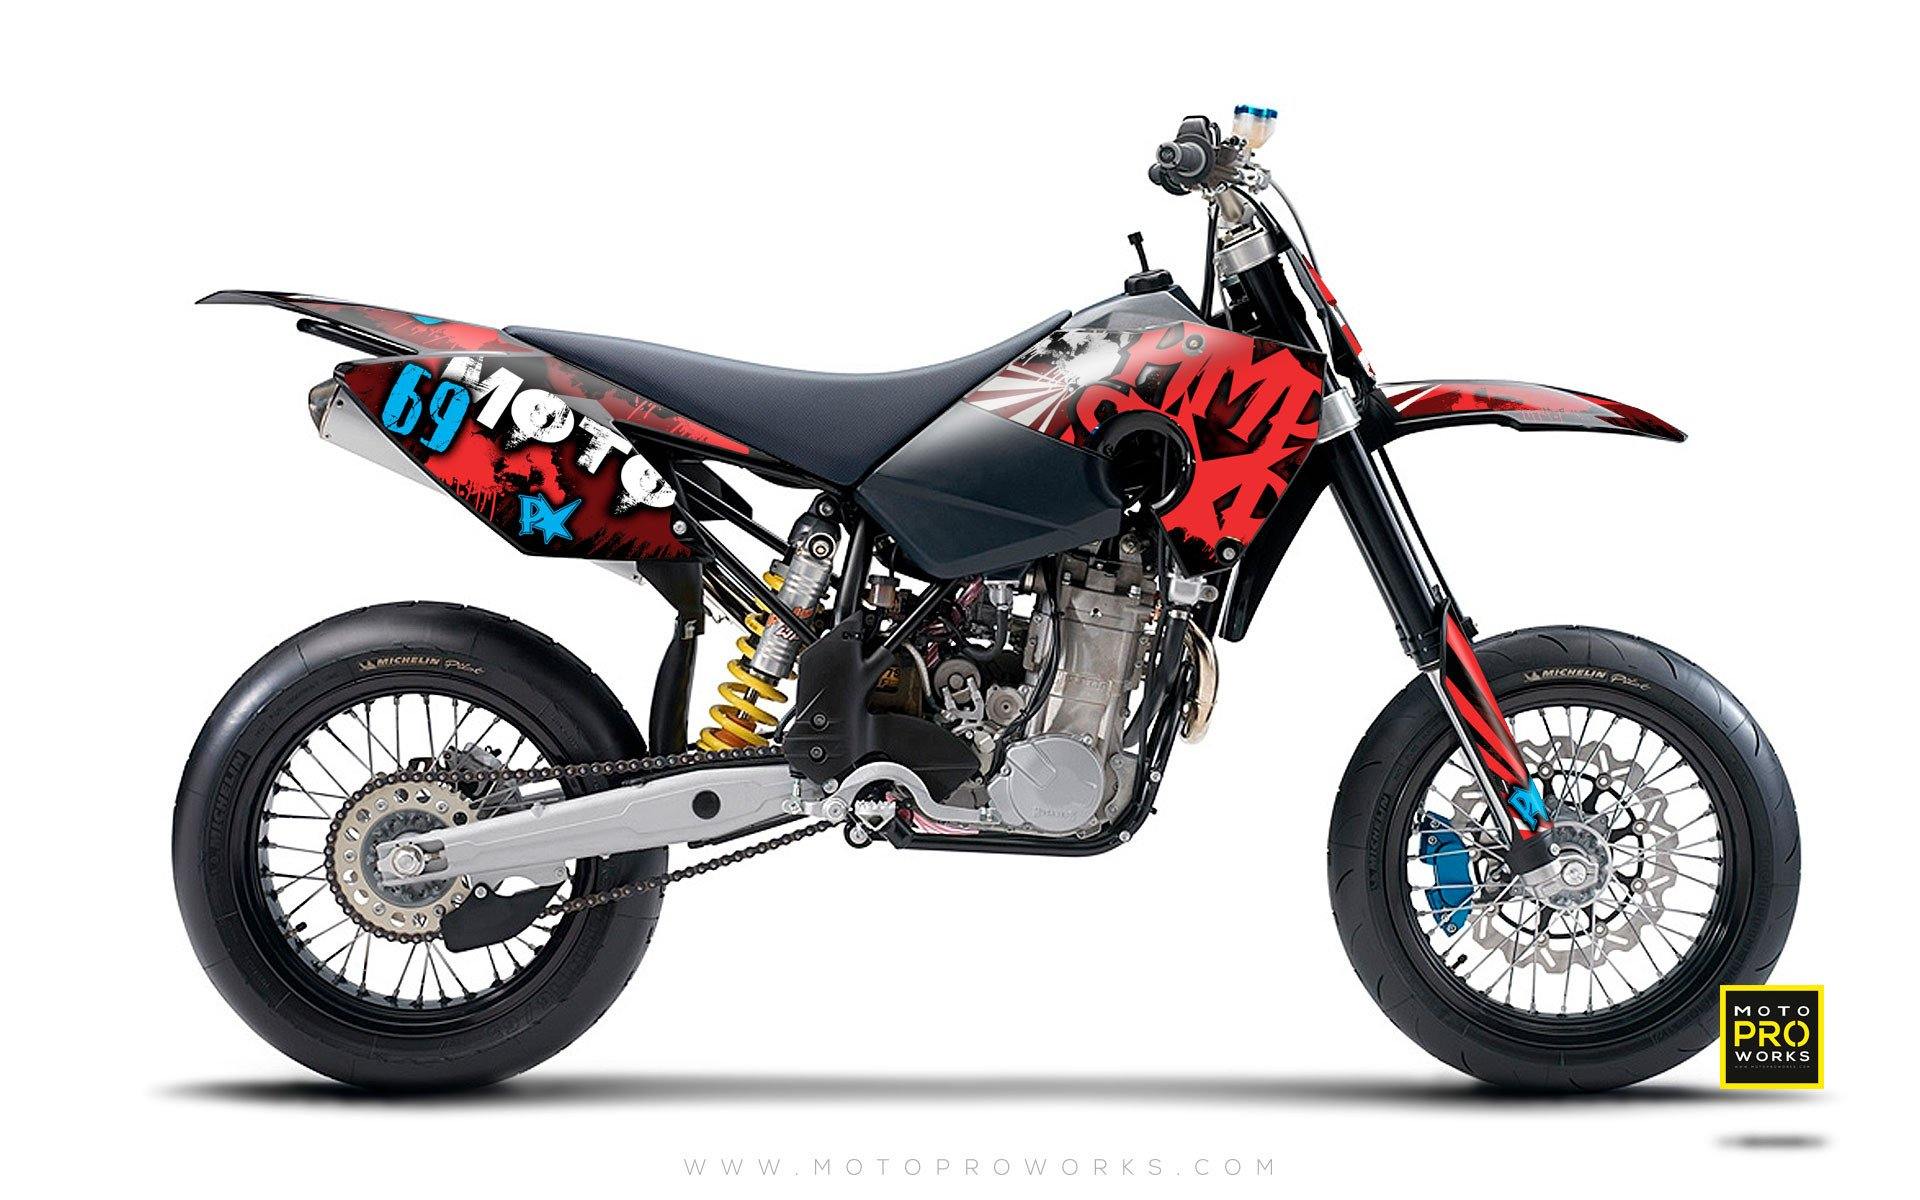 Husaberg GRAPHIC KIT - "RISING SUNNY" (red) - MotoProWorks | Decals and Bike Graphic kit